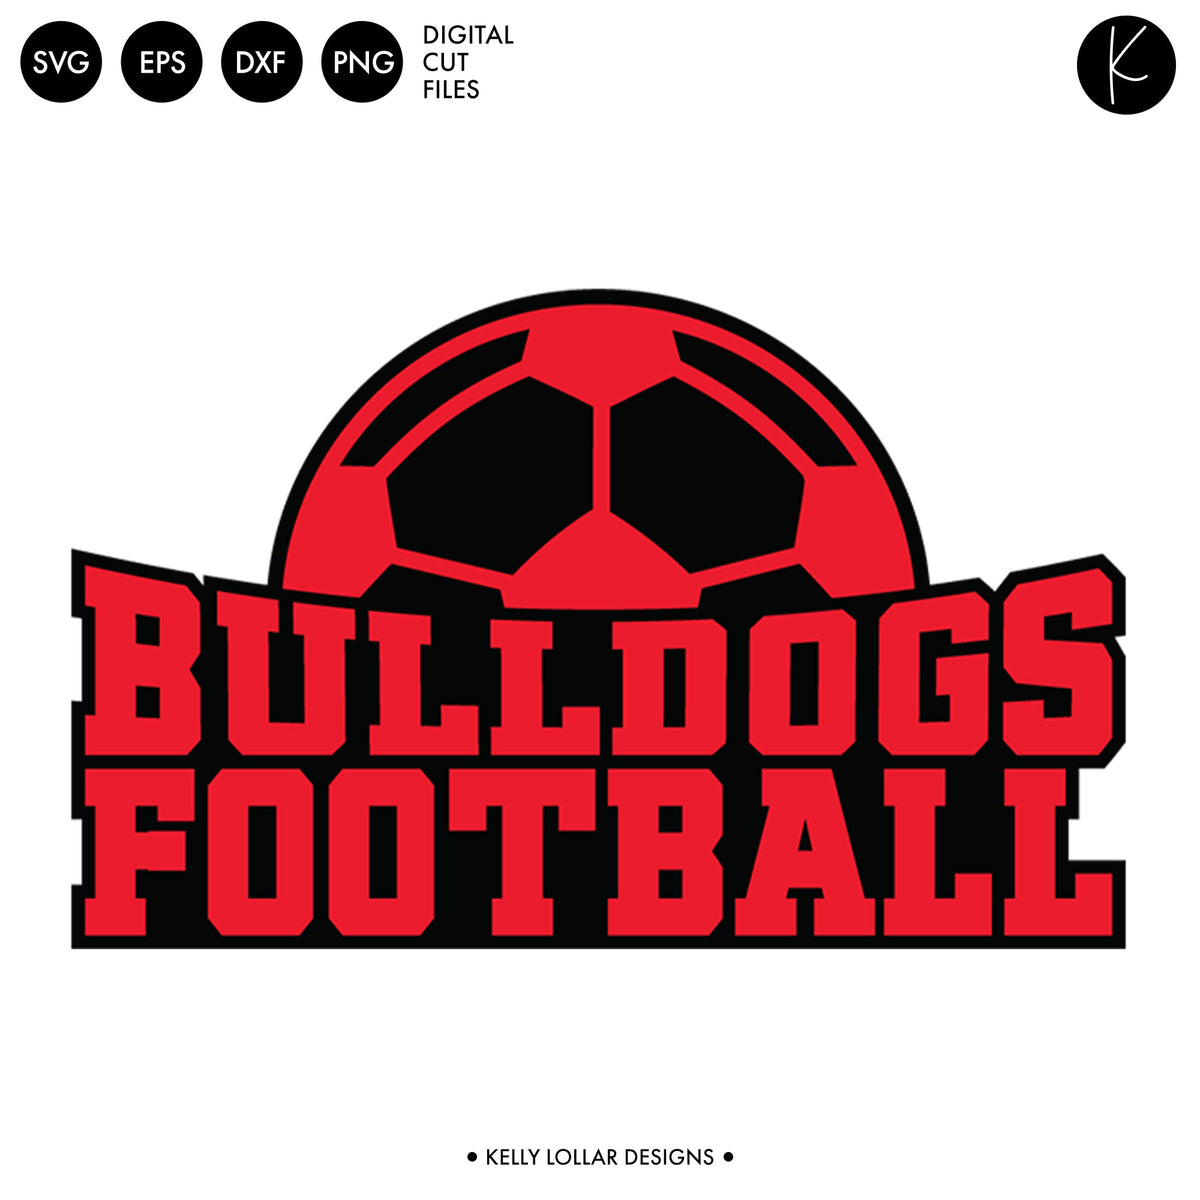 Bulldogs Soccer and Football Bundle | SVG DXF EPS PNG Cut Files